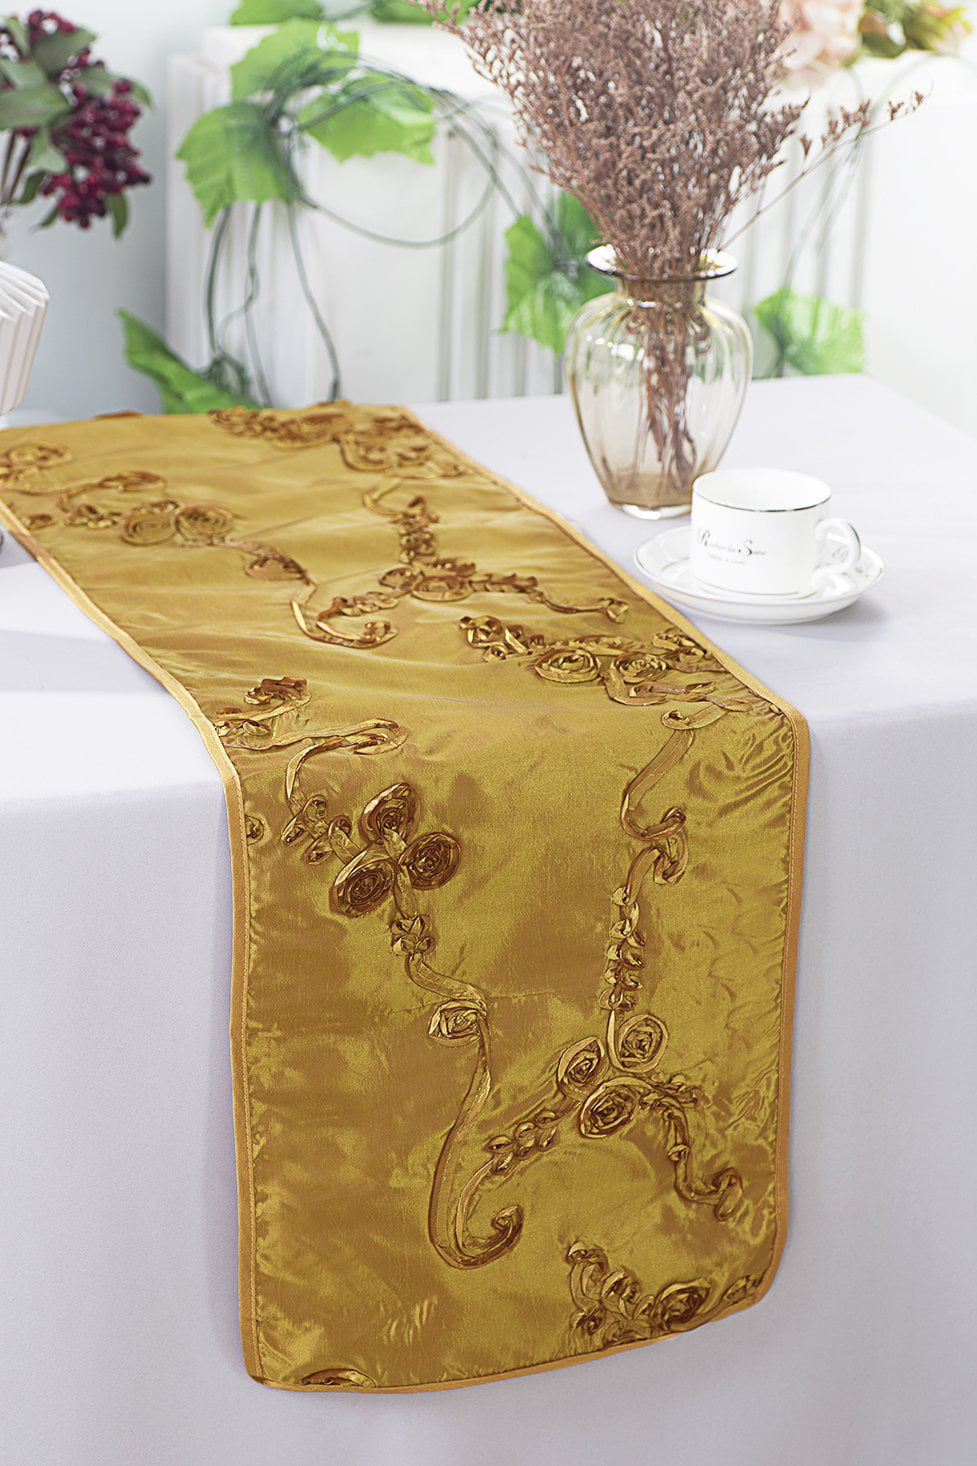 12 Tissue Lame Table Runners 14"x108" Metalic Gold or Silver Wedding Event Party 